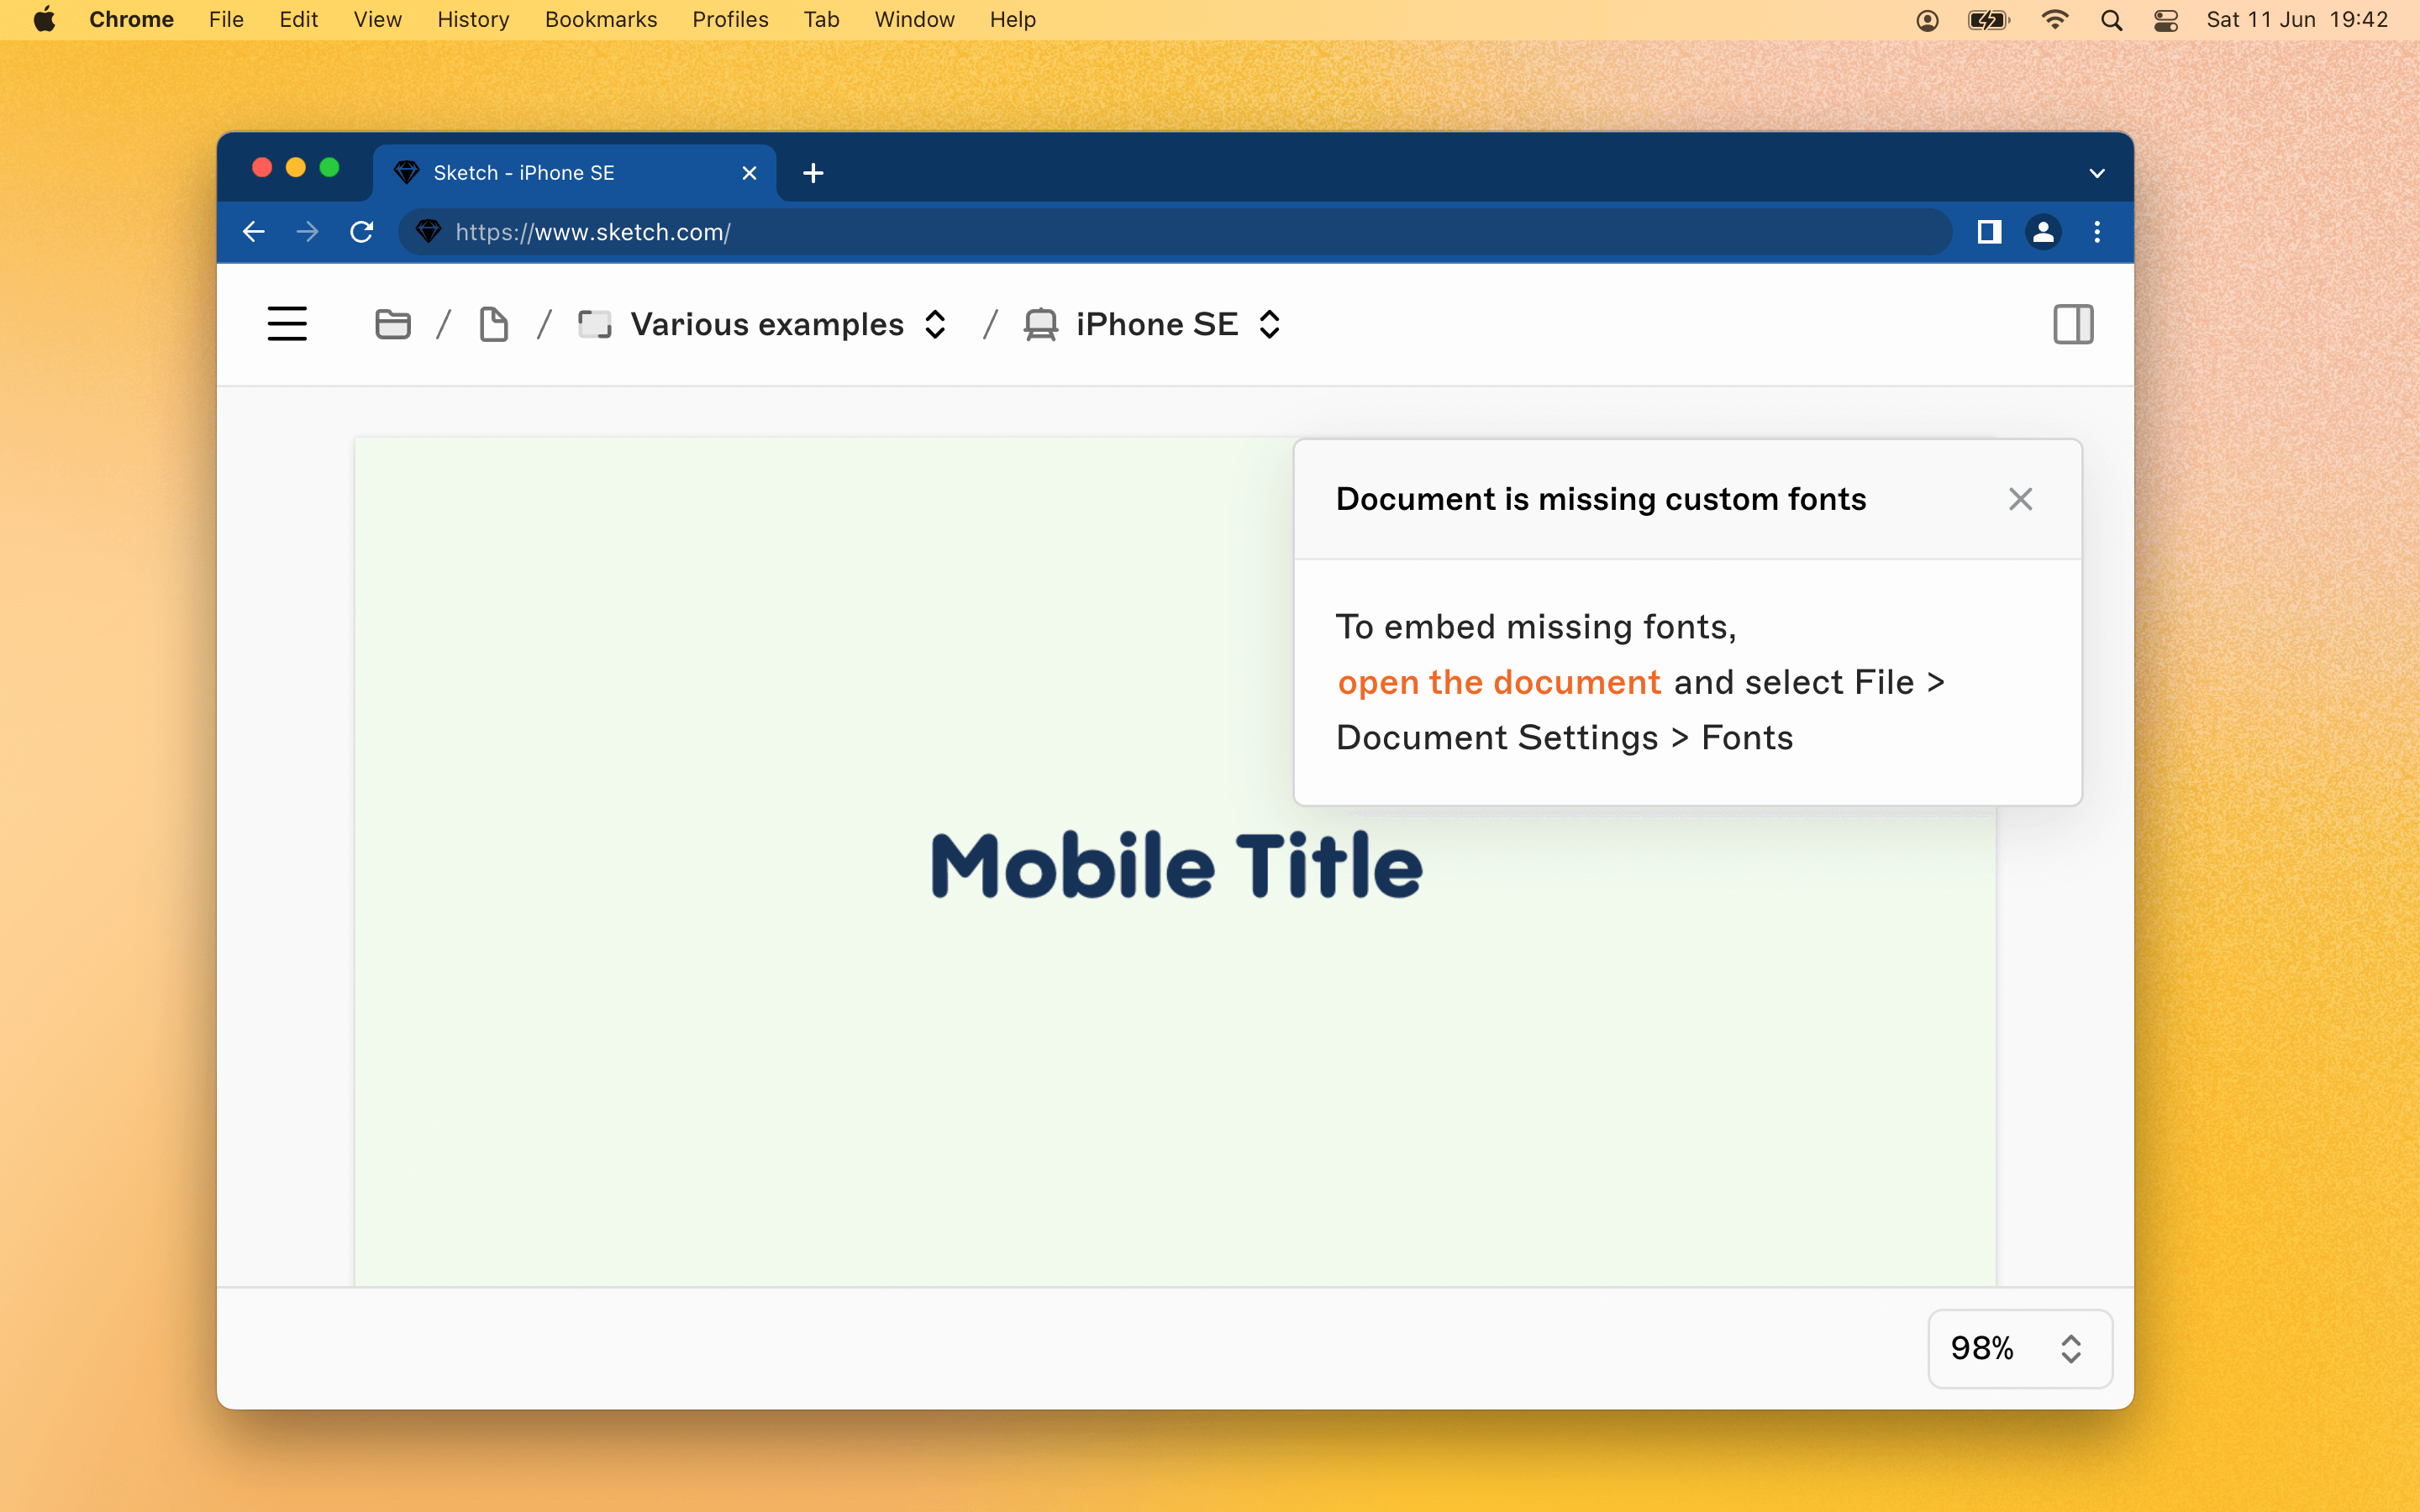 Missing font notification in the Web app